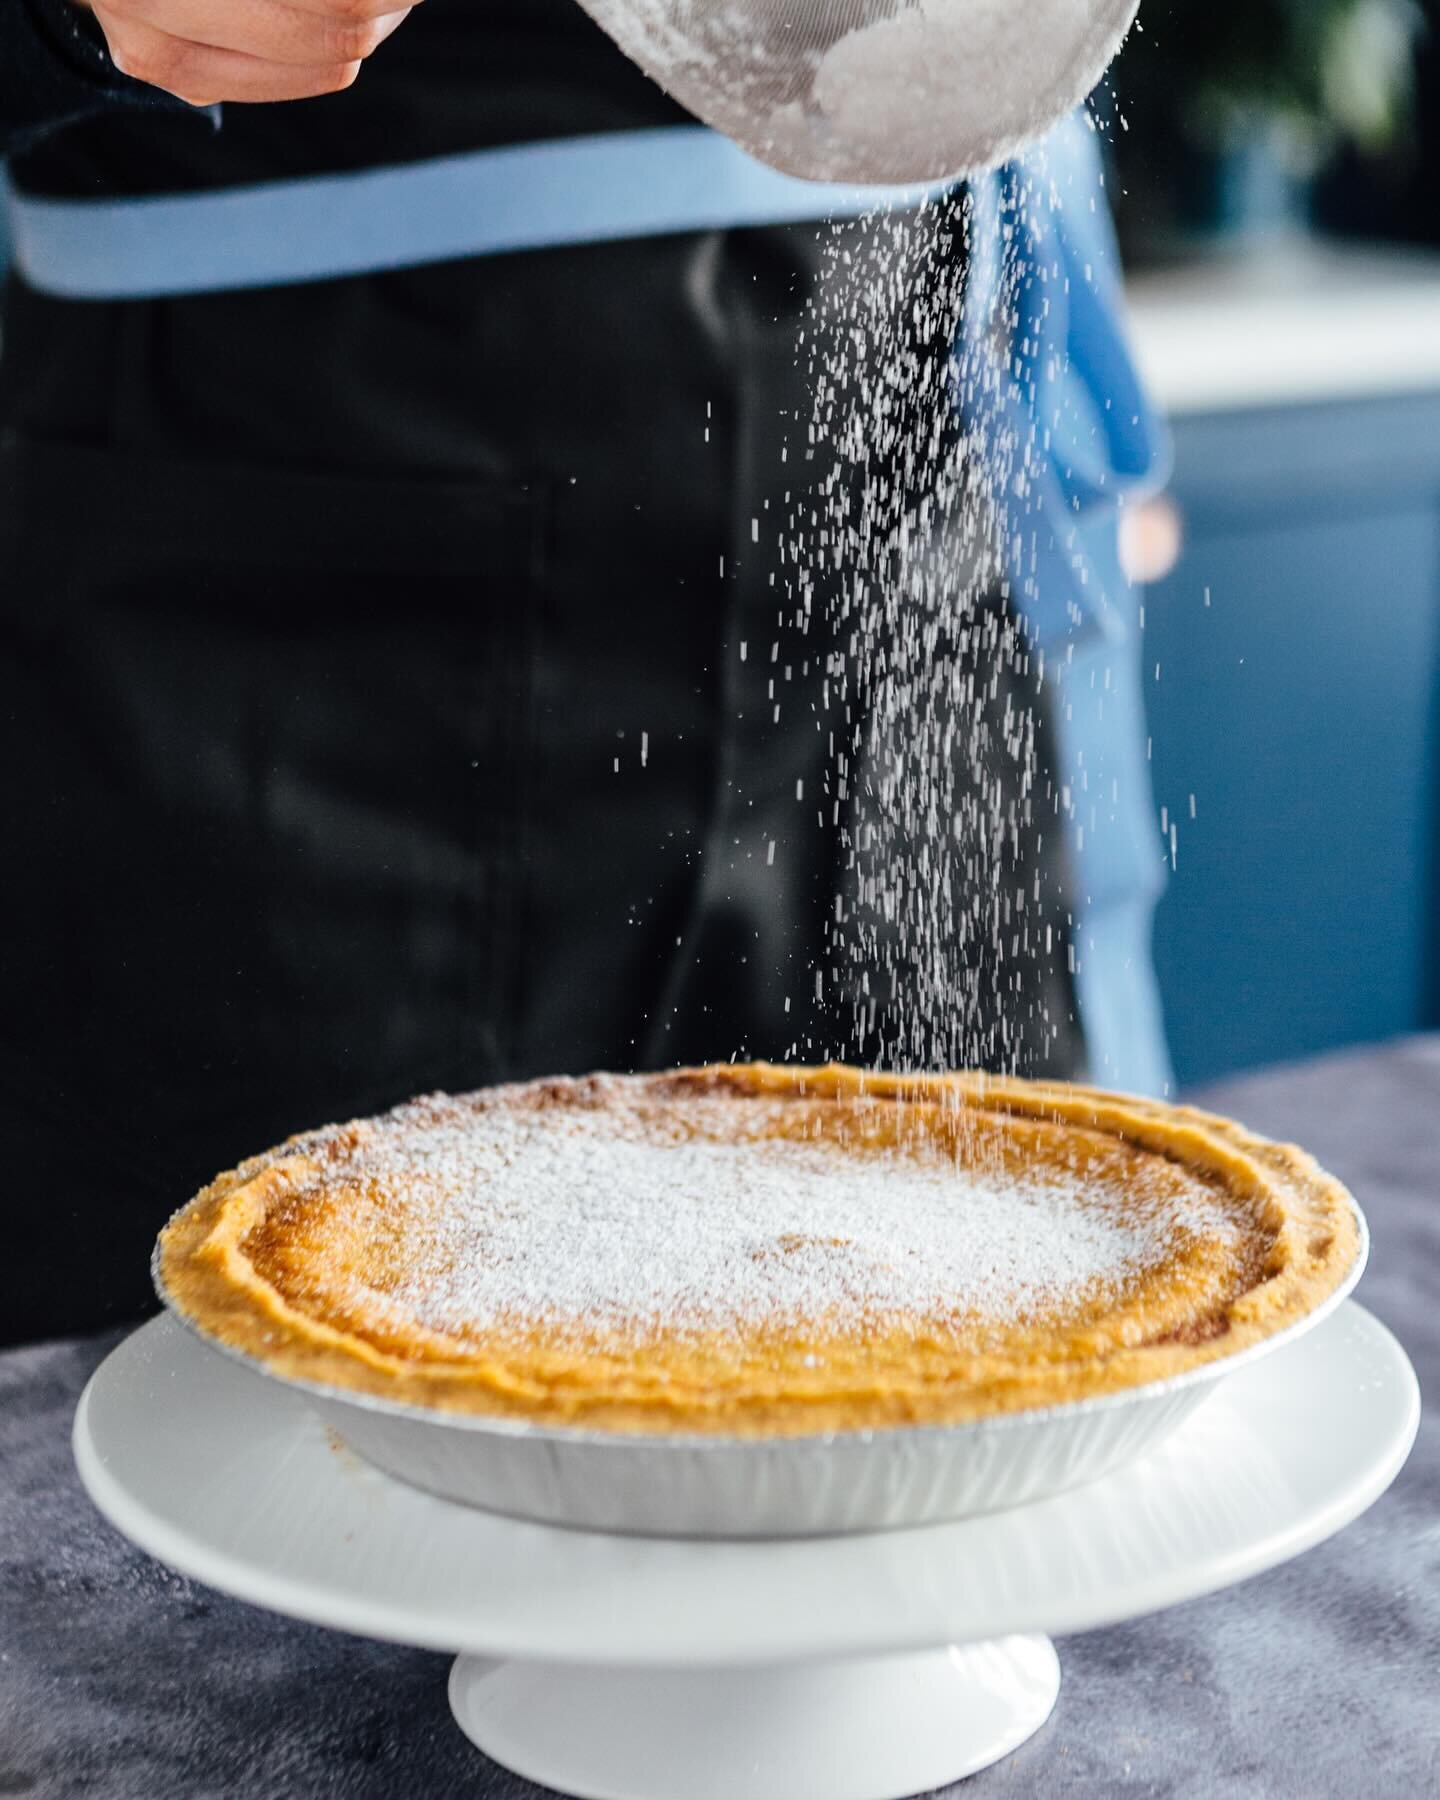 🧡🍊 The Gold Coast Citrus Chess Pie was a huge hit in January! But it&rsquo;s leaving us this week! Get it while it&rsquo;s still in the pie shops.

We have fun pies like Peanut Butter Touchdown and Valentine&rsquo;s Day pies coming soon! 🩷🏈